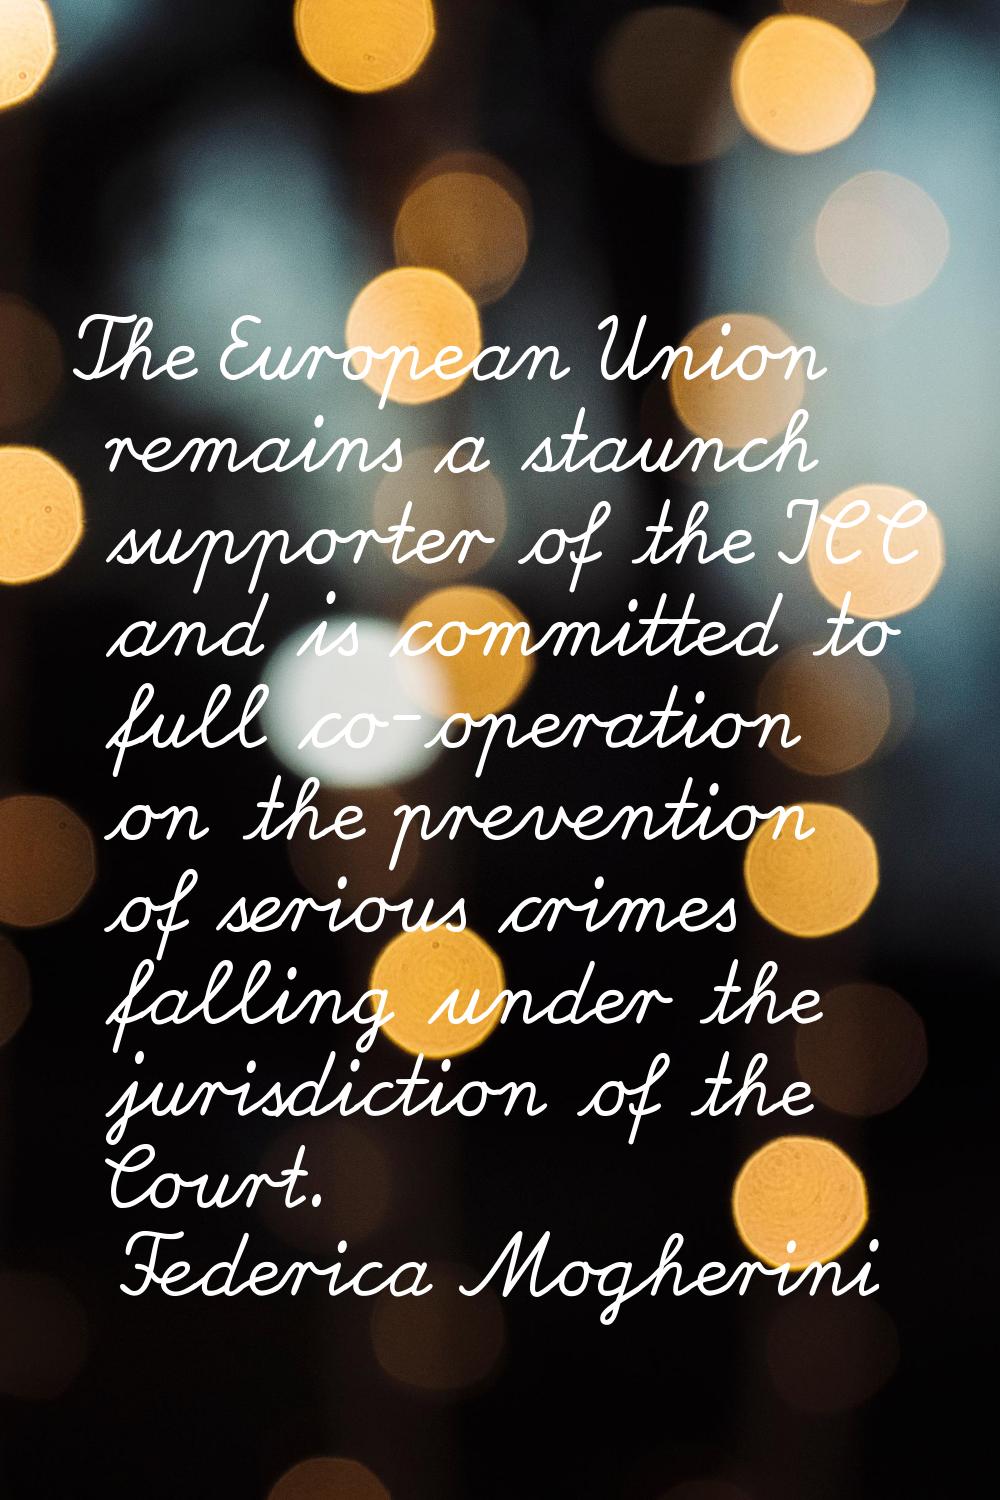 The European Union remains a staunch supporter of the ICC and is committed to full co-operation on 